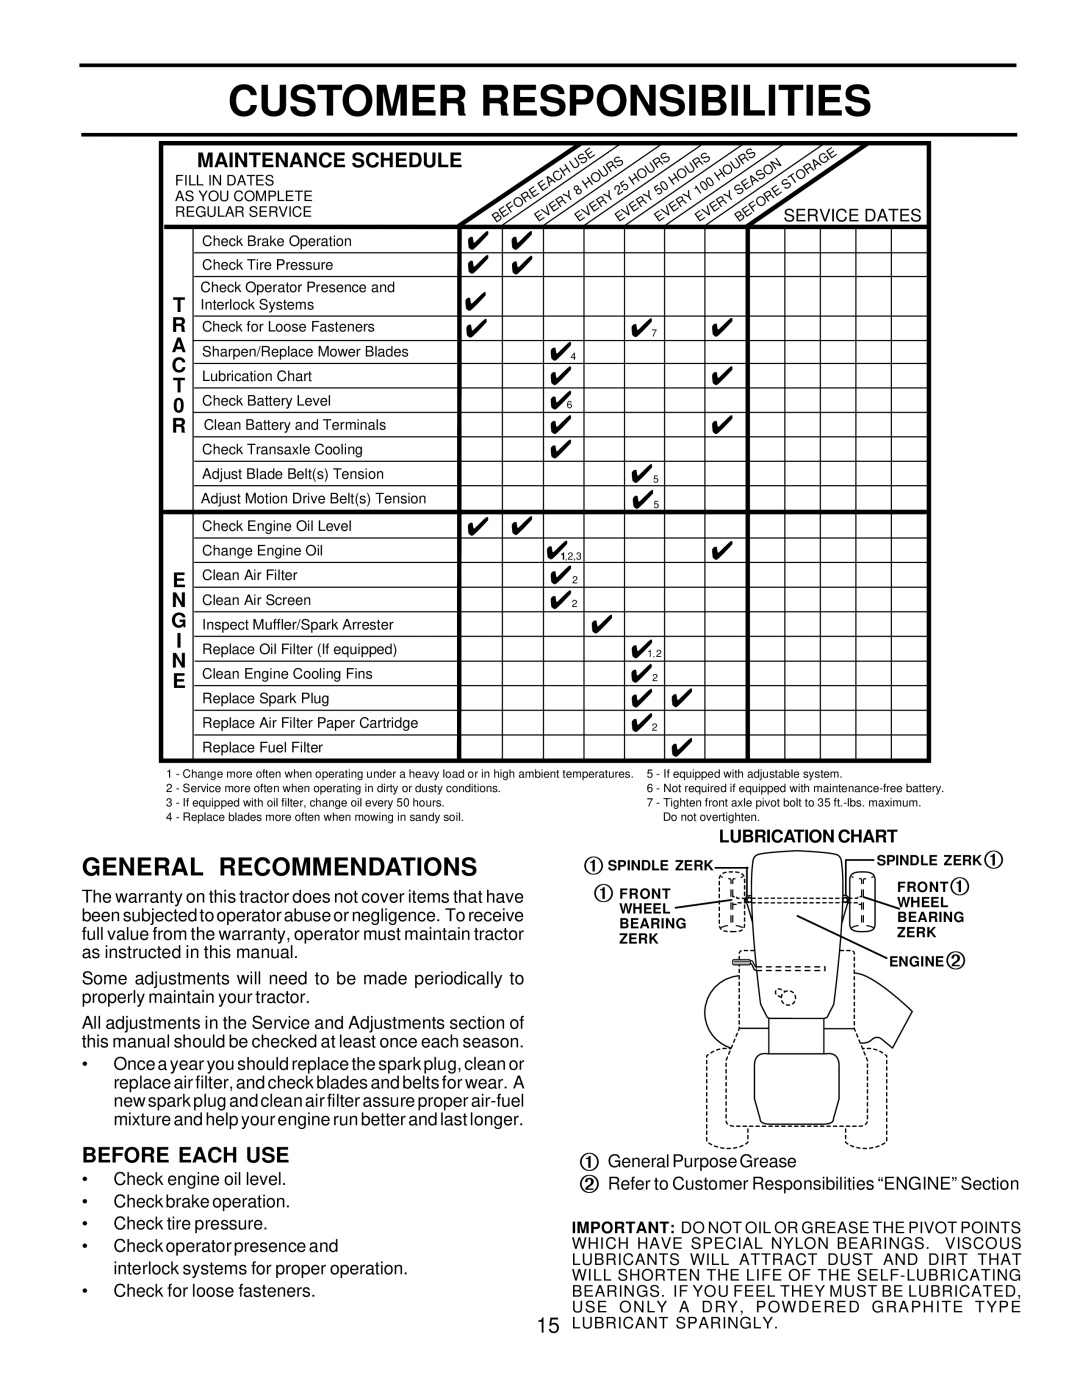 Husqvarna LTH120 owner manual Customer Responsibilities, General Recommendations, Before Each Use, Maintenance Schedule 